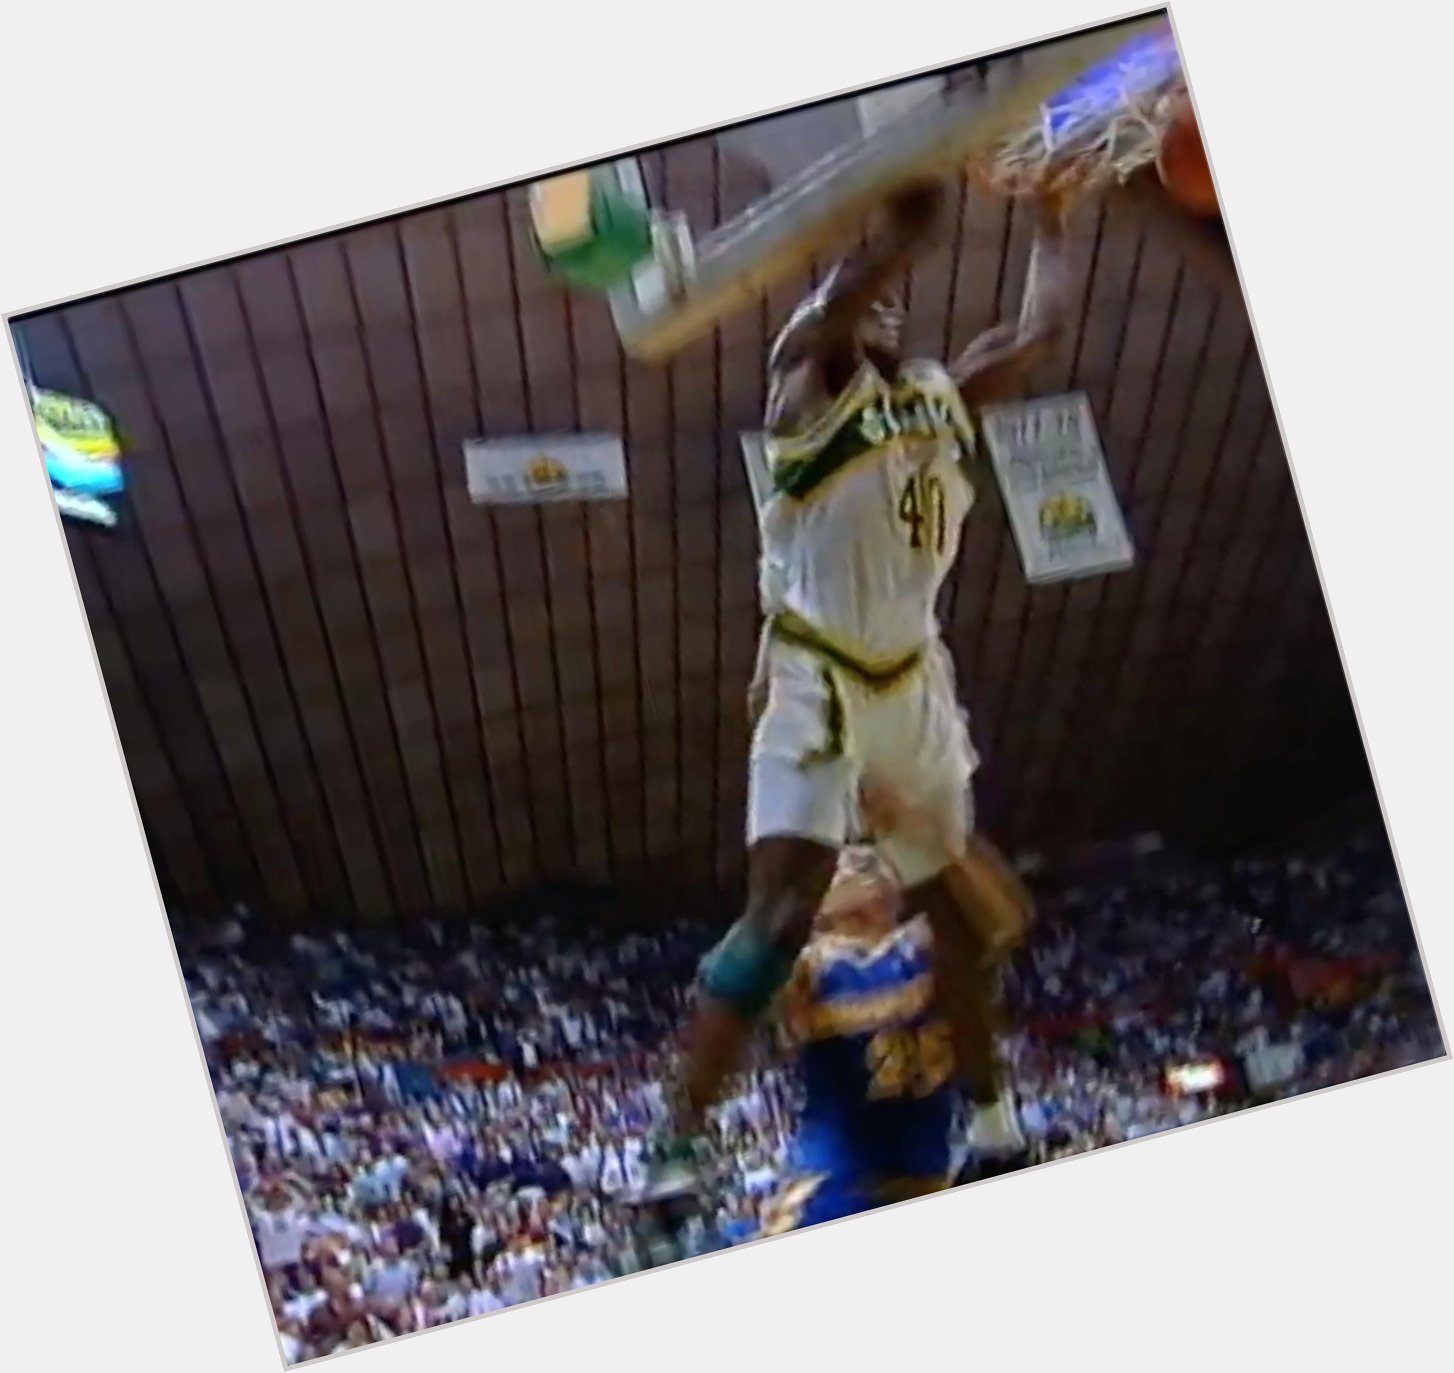 Happy 50th birthday to Shawn Kemp, one of the greatest dunkers of all-time 